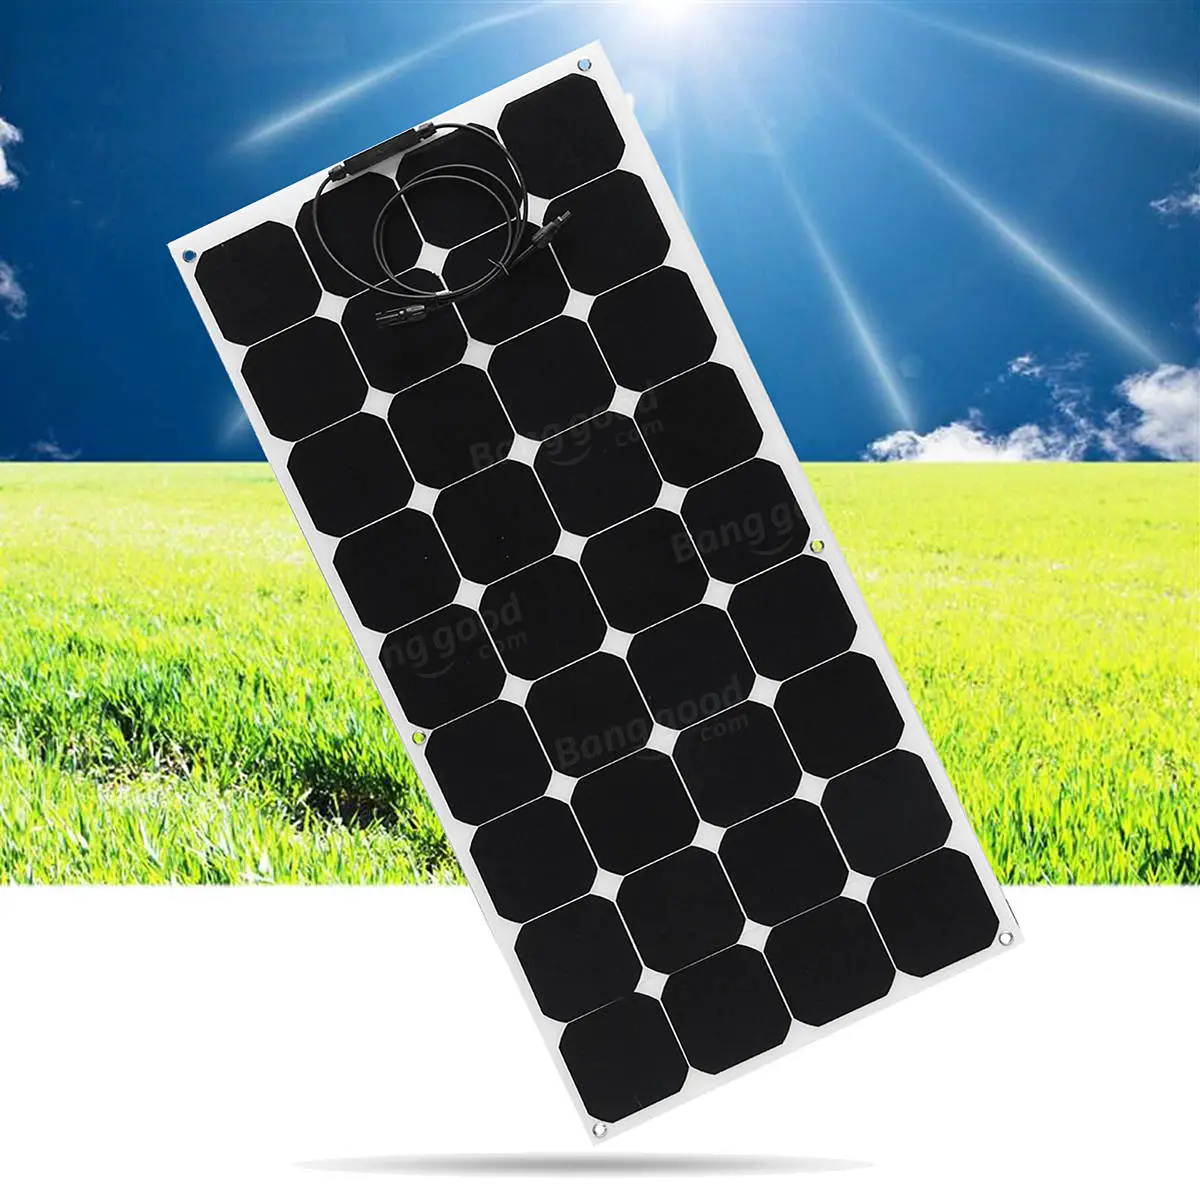 Elfeland SP35 140W 18V Sunpower Chip Solar Panel With 1a5m Cable And ...